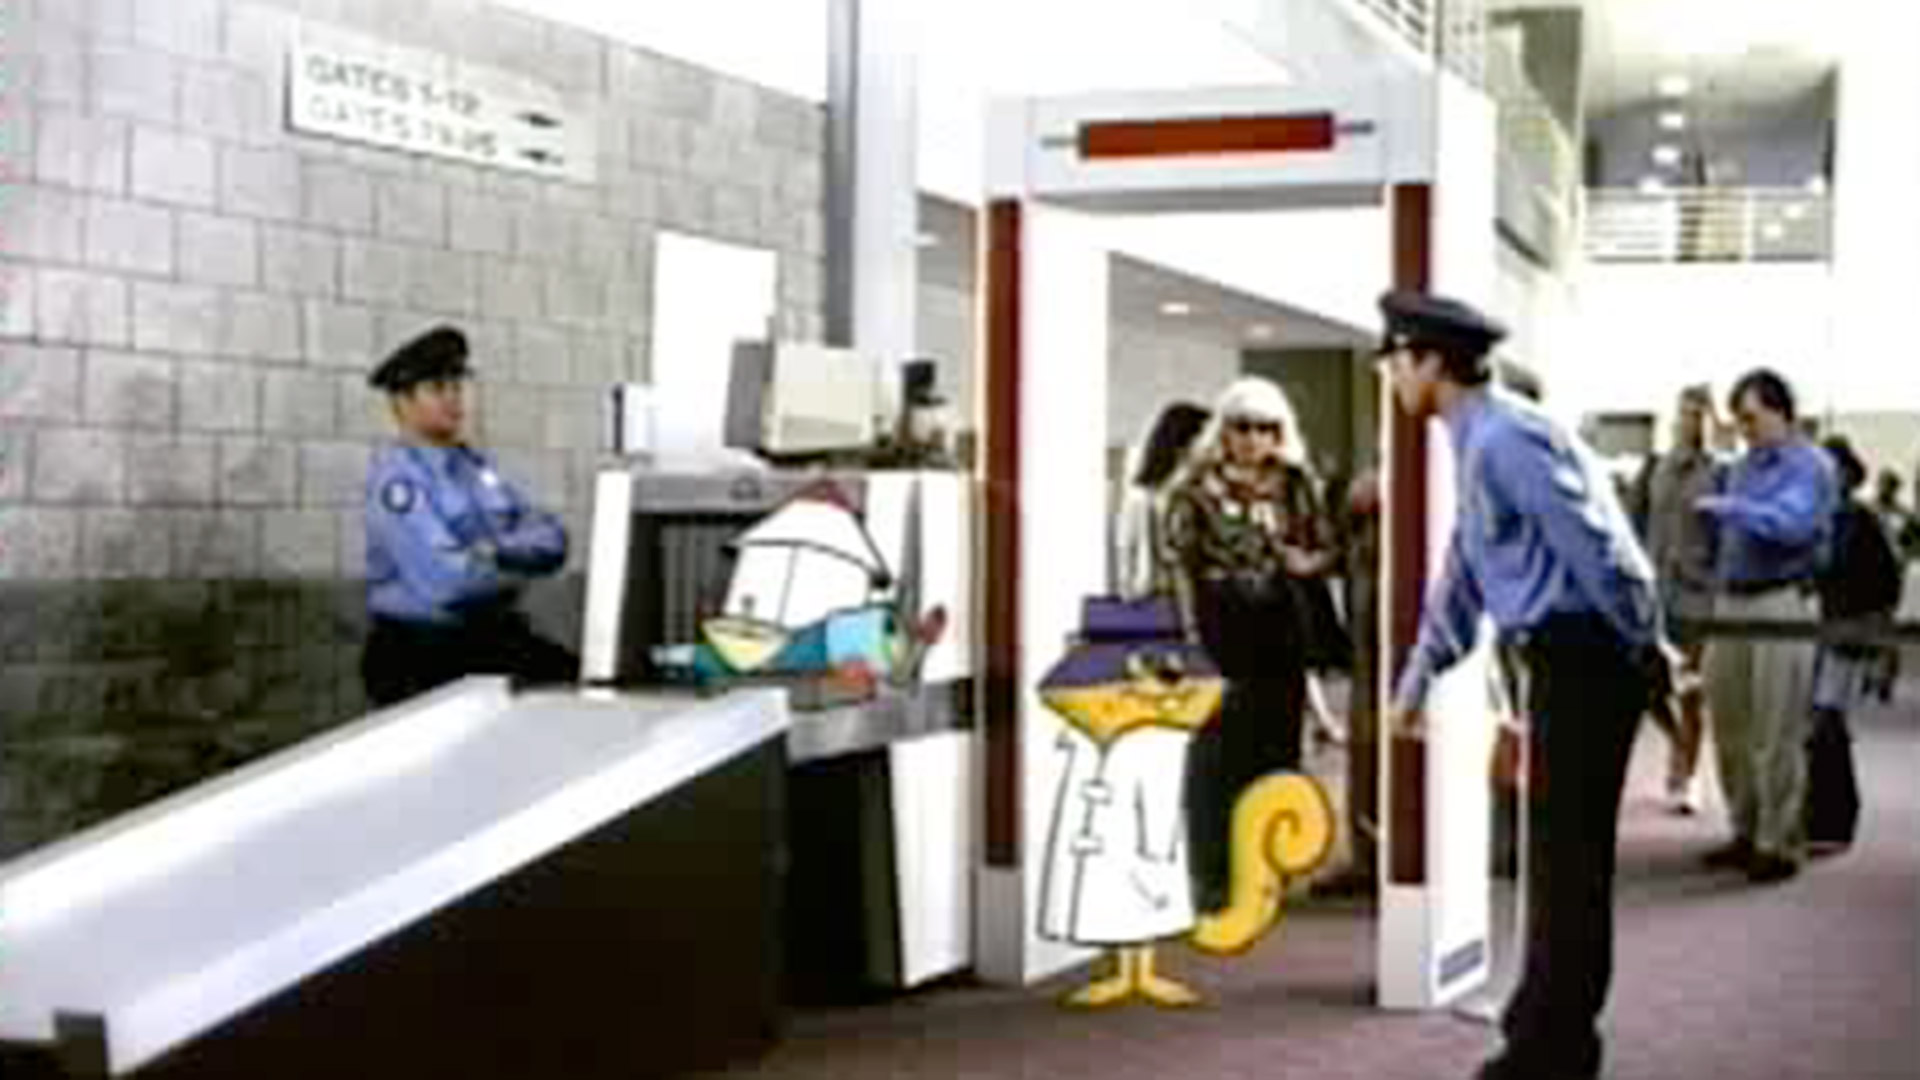 Clearly the Best Place Campaign - Secret Squirrel, Fred Car, Jane  Jetson Microwave